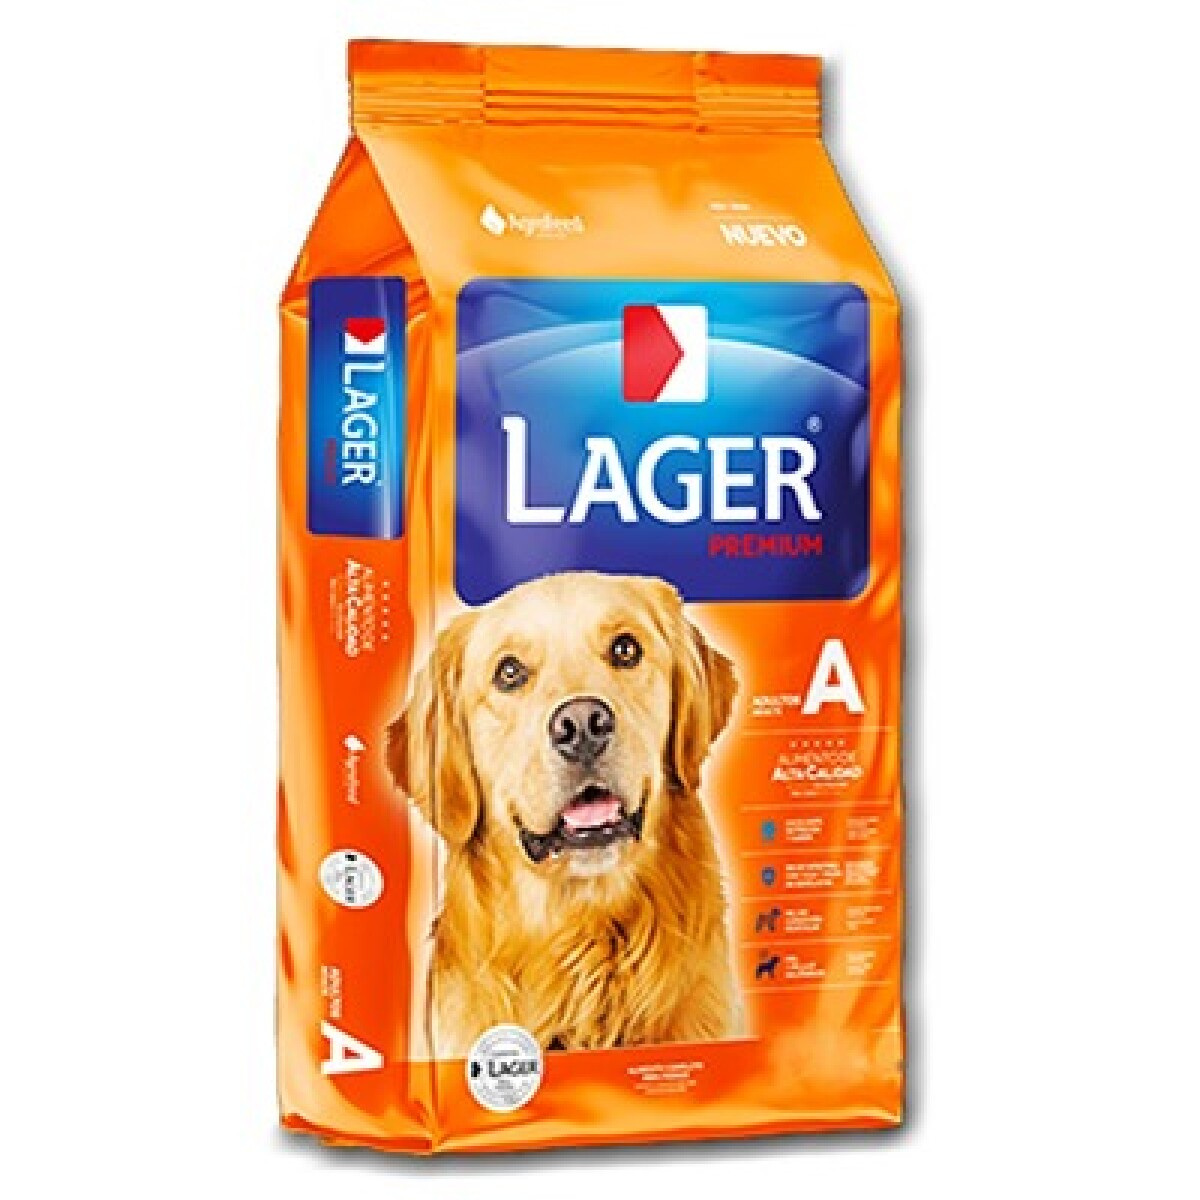 LAGER ADULTO 1.5 KG - Unica 